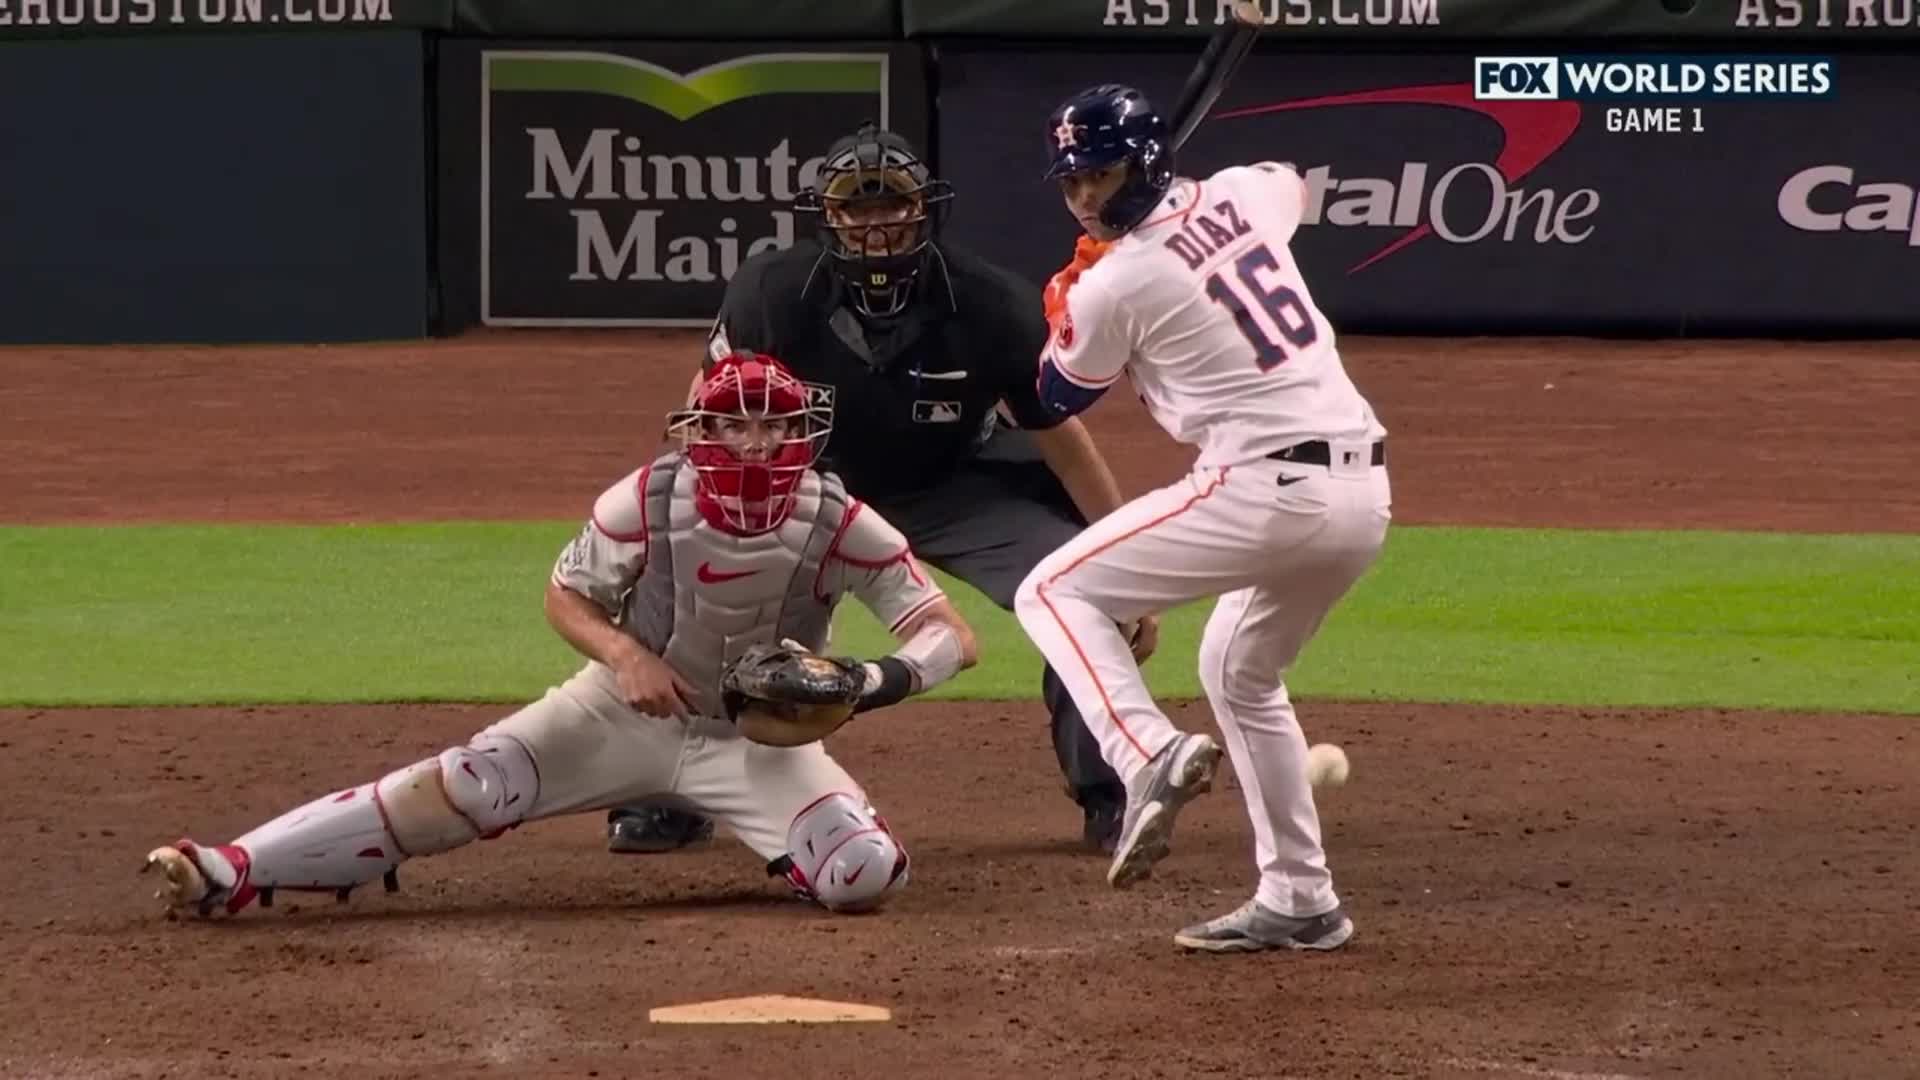 Highlight] Aledmys Díaz gets hit by the pitch, but doesn't get the